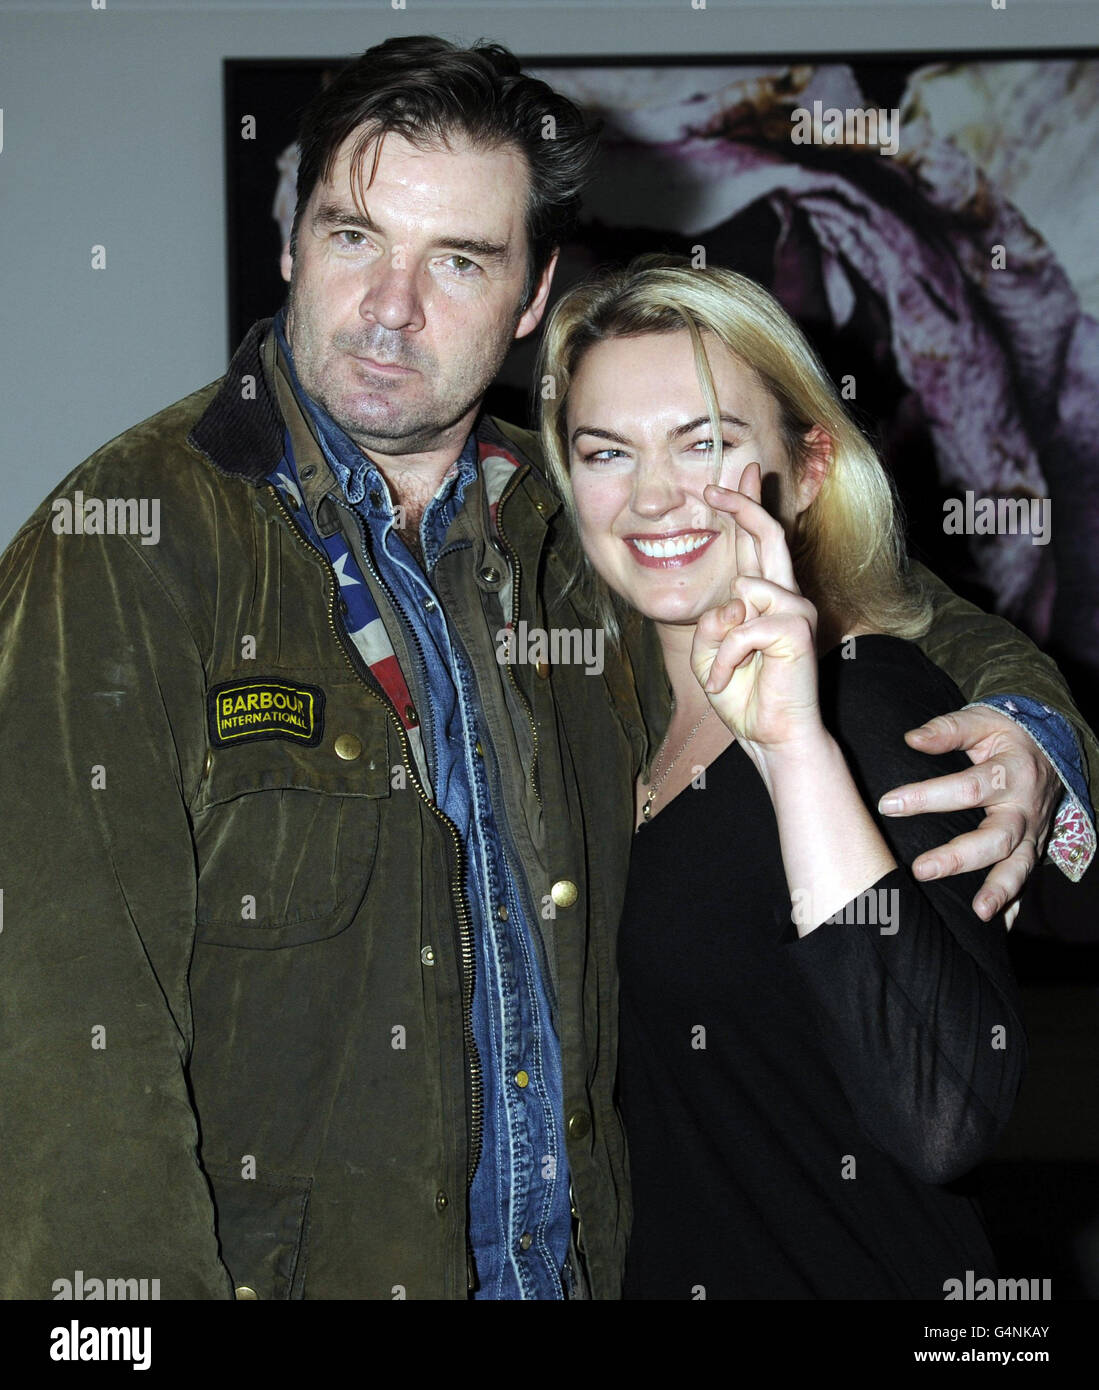 Brendan Coyle and Sophia Myles arrive at The Old Vic 24 Hour Plays celebrity gala aftershow party Plays at the Corinthia Hotel in central London. PRESS ASSOFCIATION Photo. Picture date: Sunday November 13 2011. Photo credit should read: Rebecca Naden/PA Wire Stock Photo